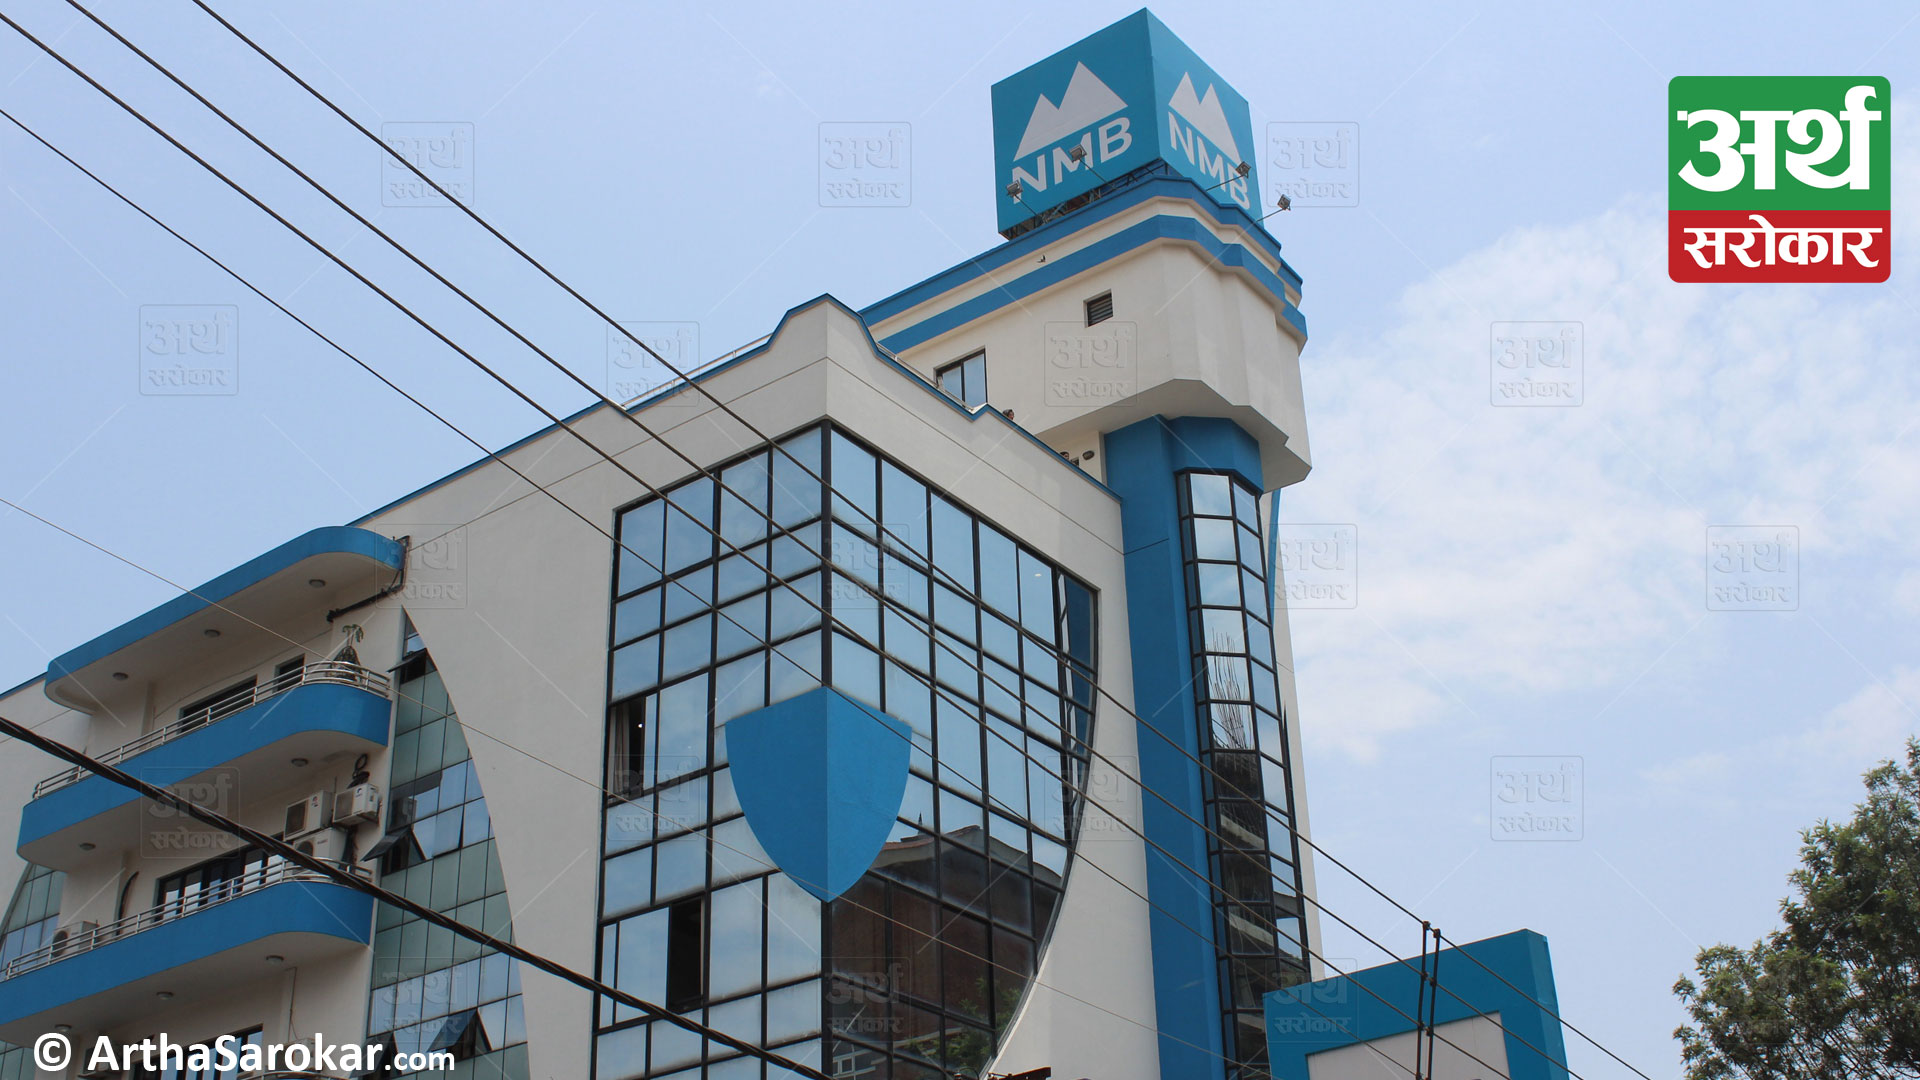 NMB Bank released its financial report of the first quarter, profit increased by 6.53%